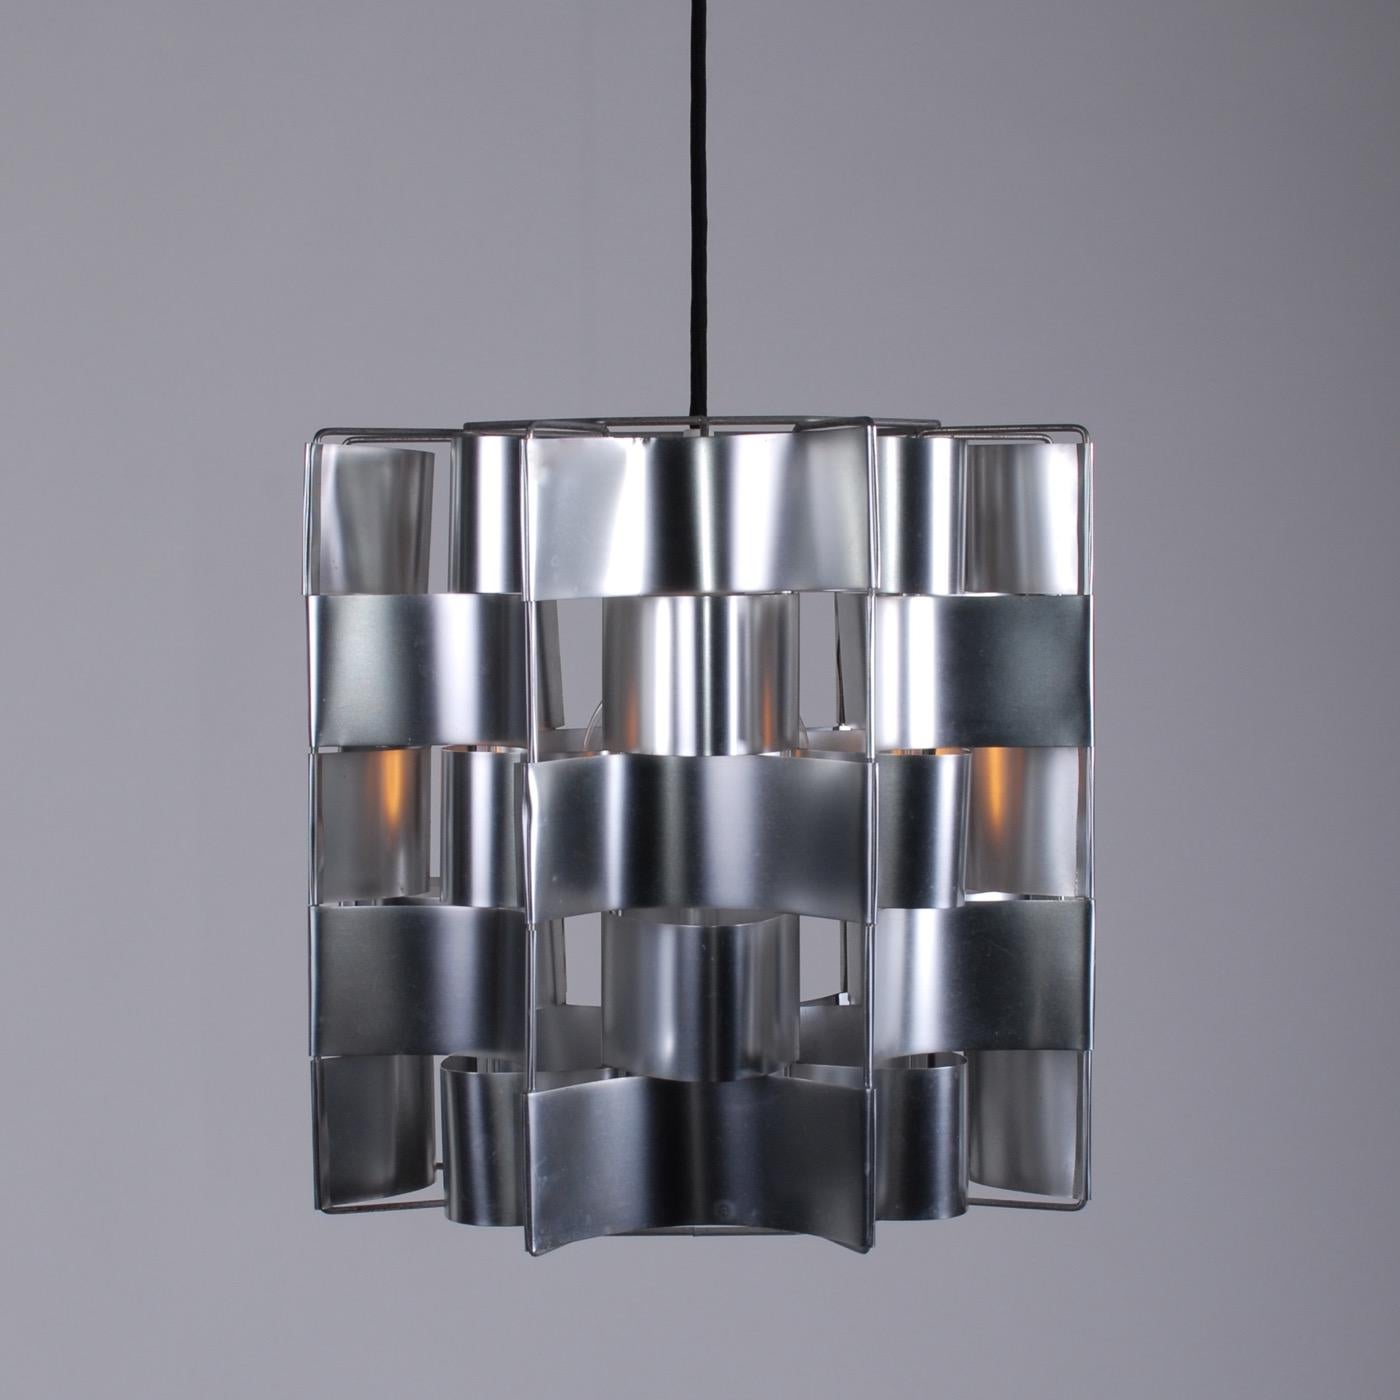 French Space Age Max Sauze aluminium silver Ceiling lamp 1970s early production. 
Ceiling lamp manufactured at Max Sauze workshops consisting of aluminium sheets stretched on a steel grid. Partly hand made at Sauze in France. Newly wired with